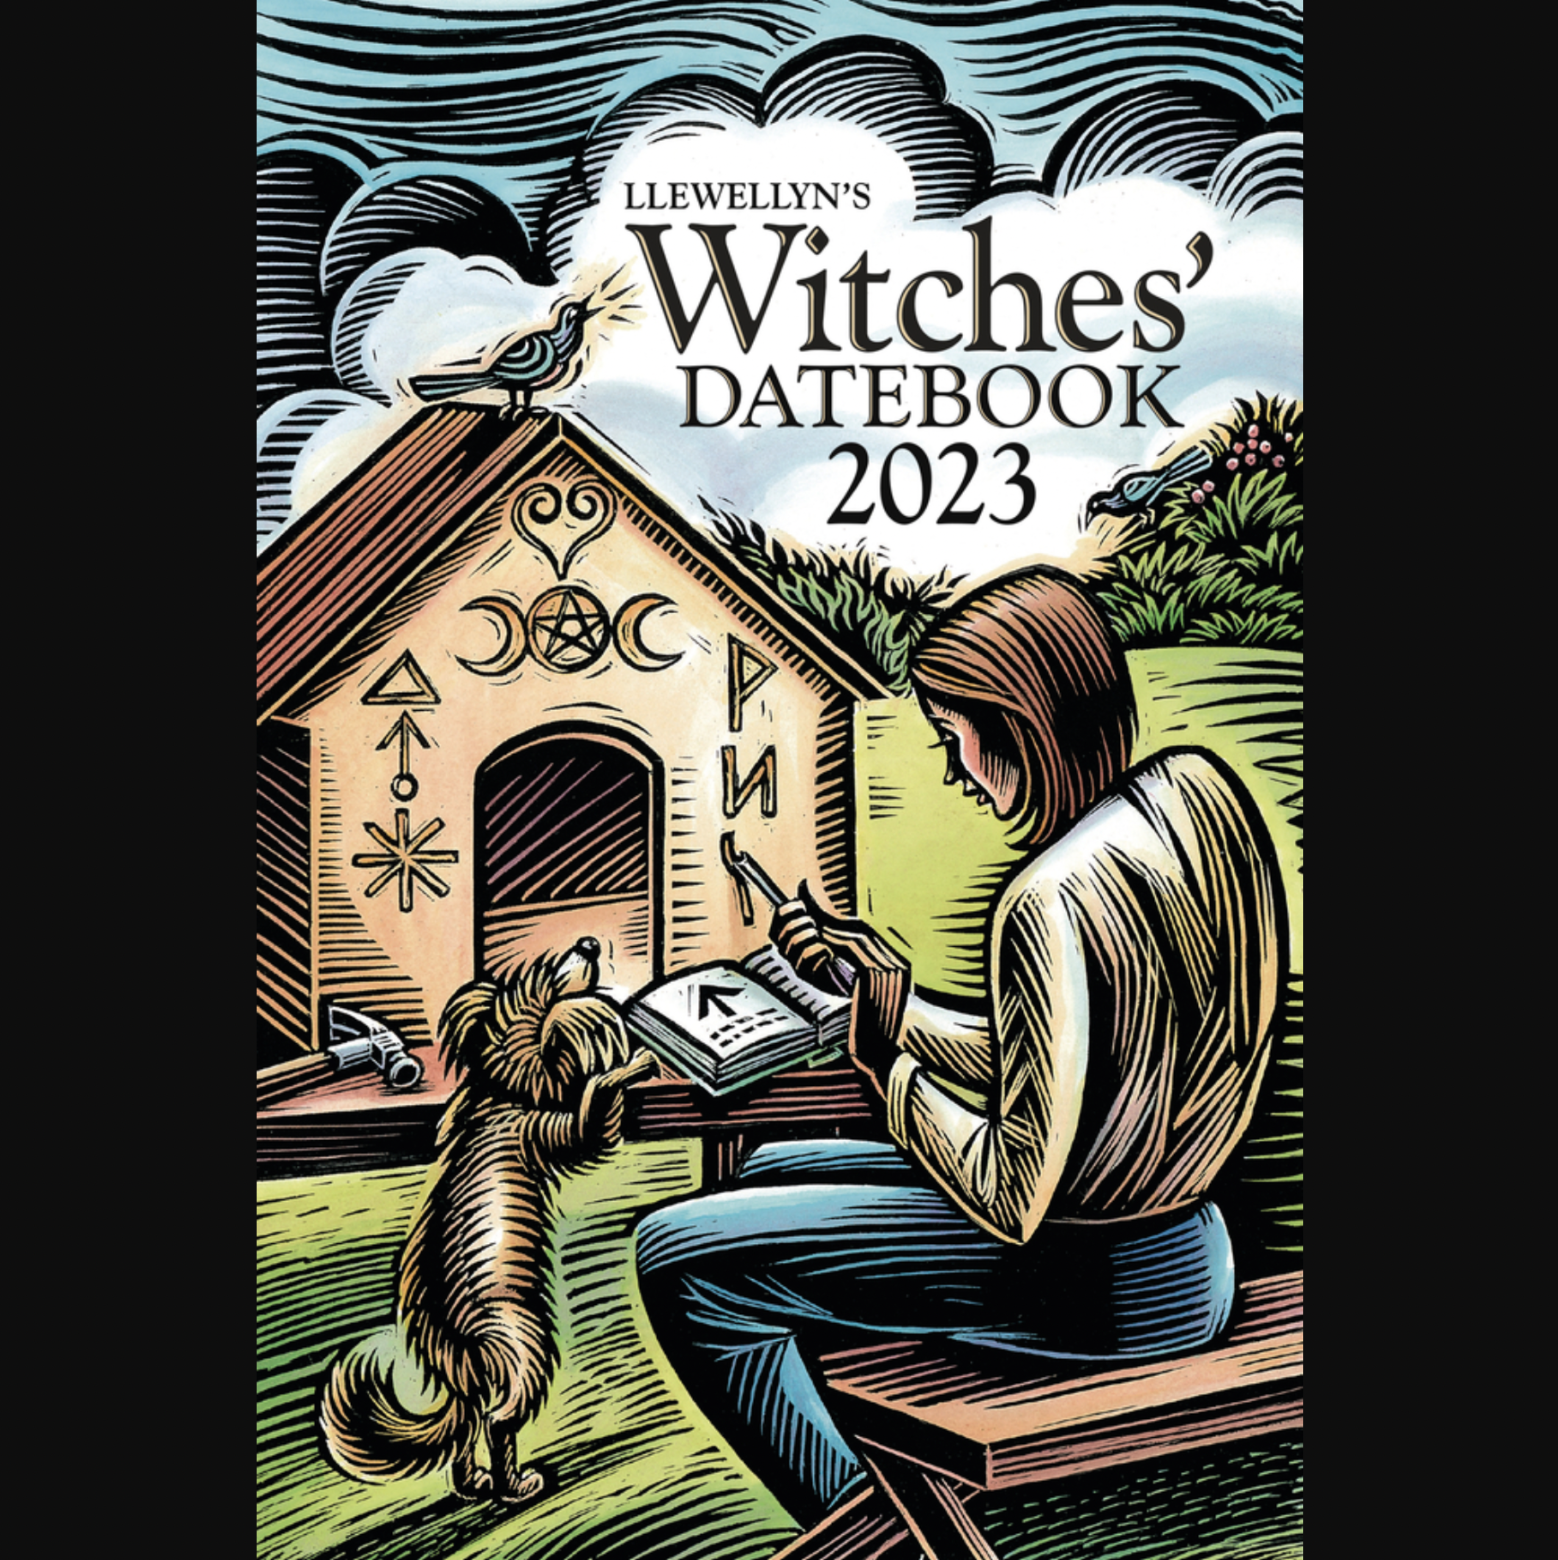 Llewellyn's Witches' Datebook 2023